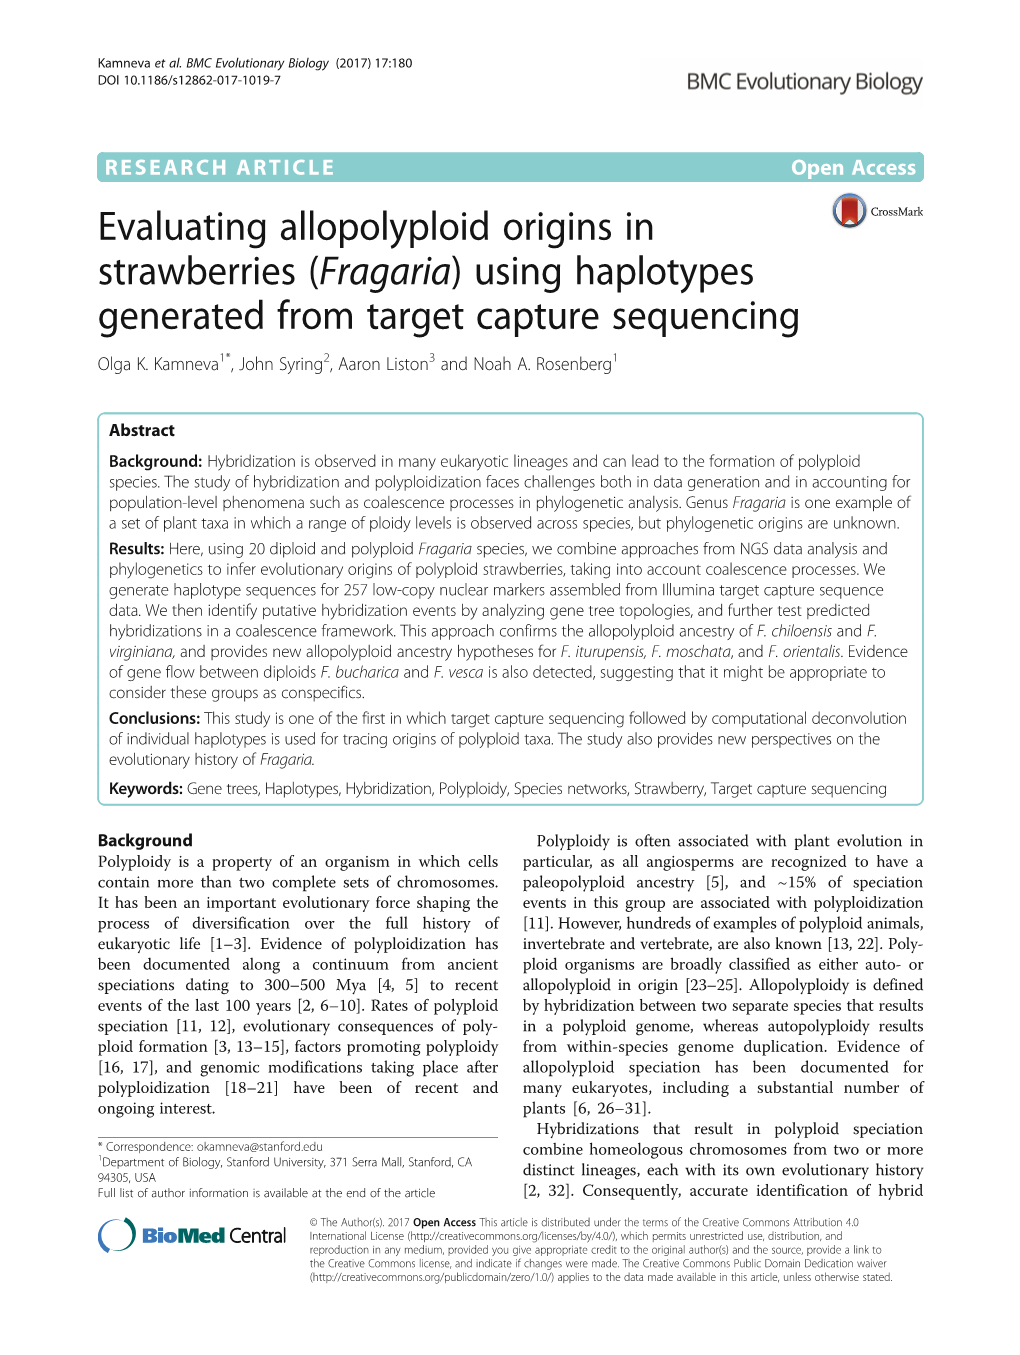 Using Haplotypes Generated from Target Capture Sequencing Olga K